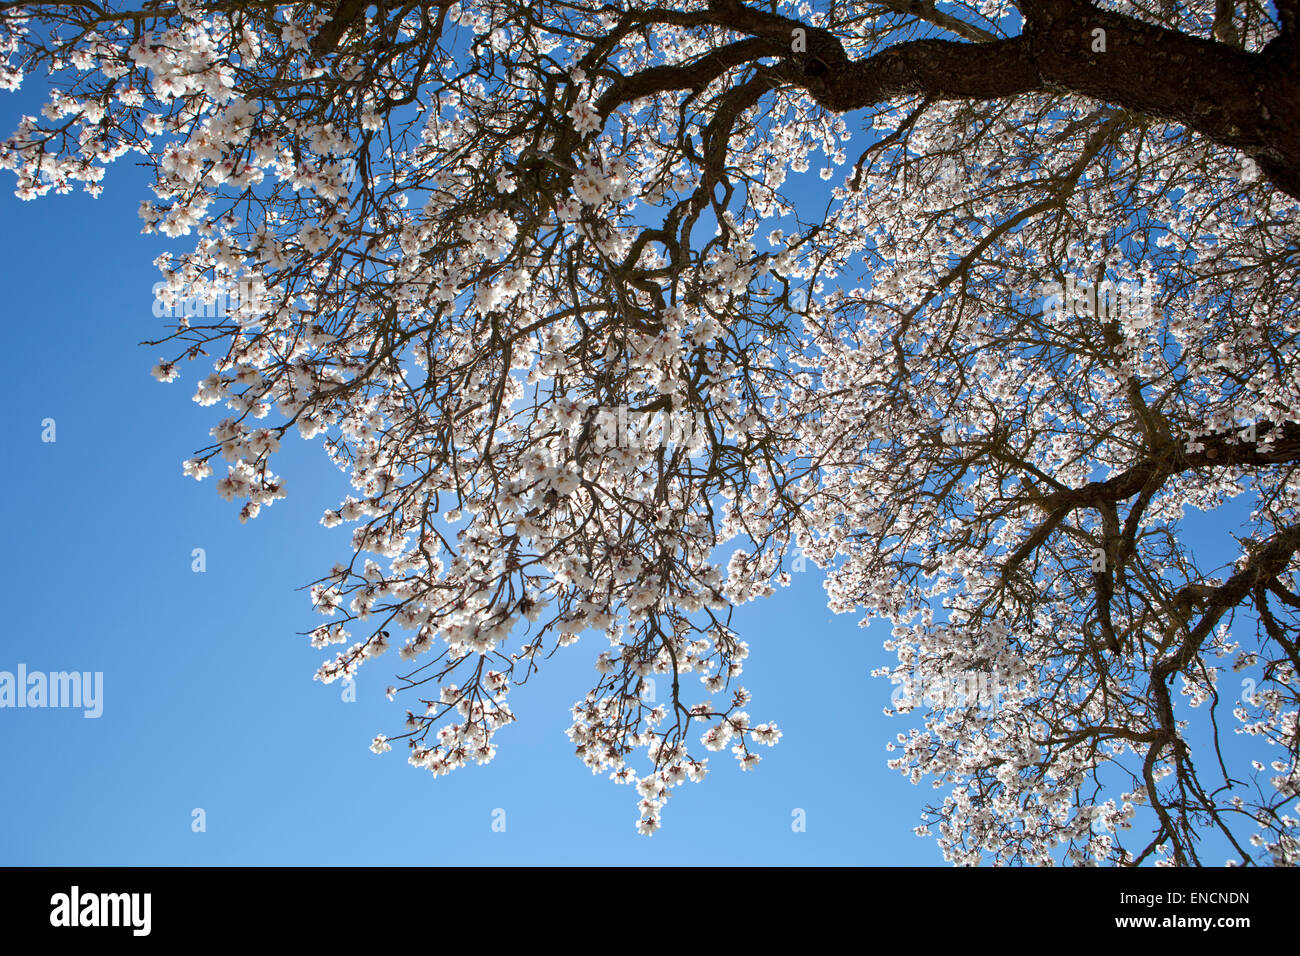 Lonely pear tree branch in full bloom over blue sunny sky Stock Photo